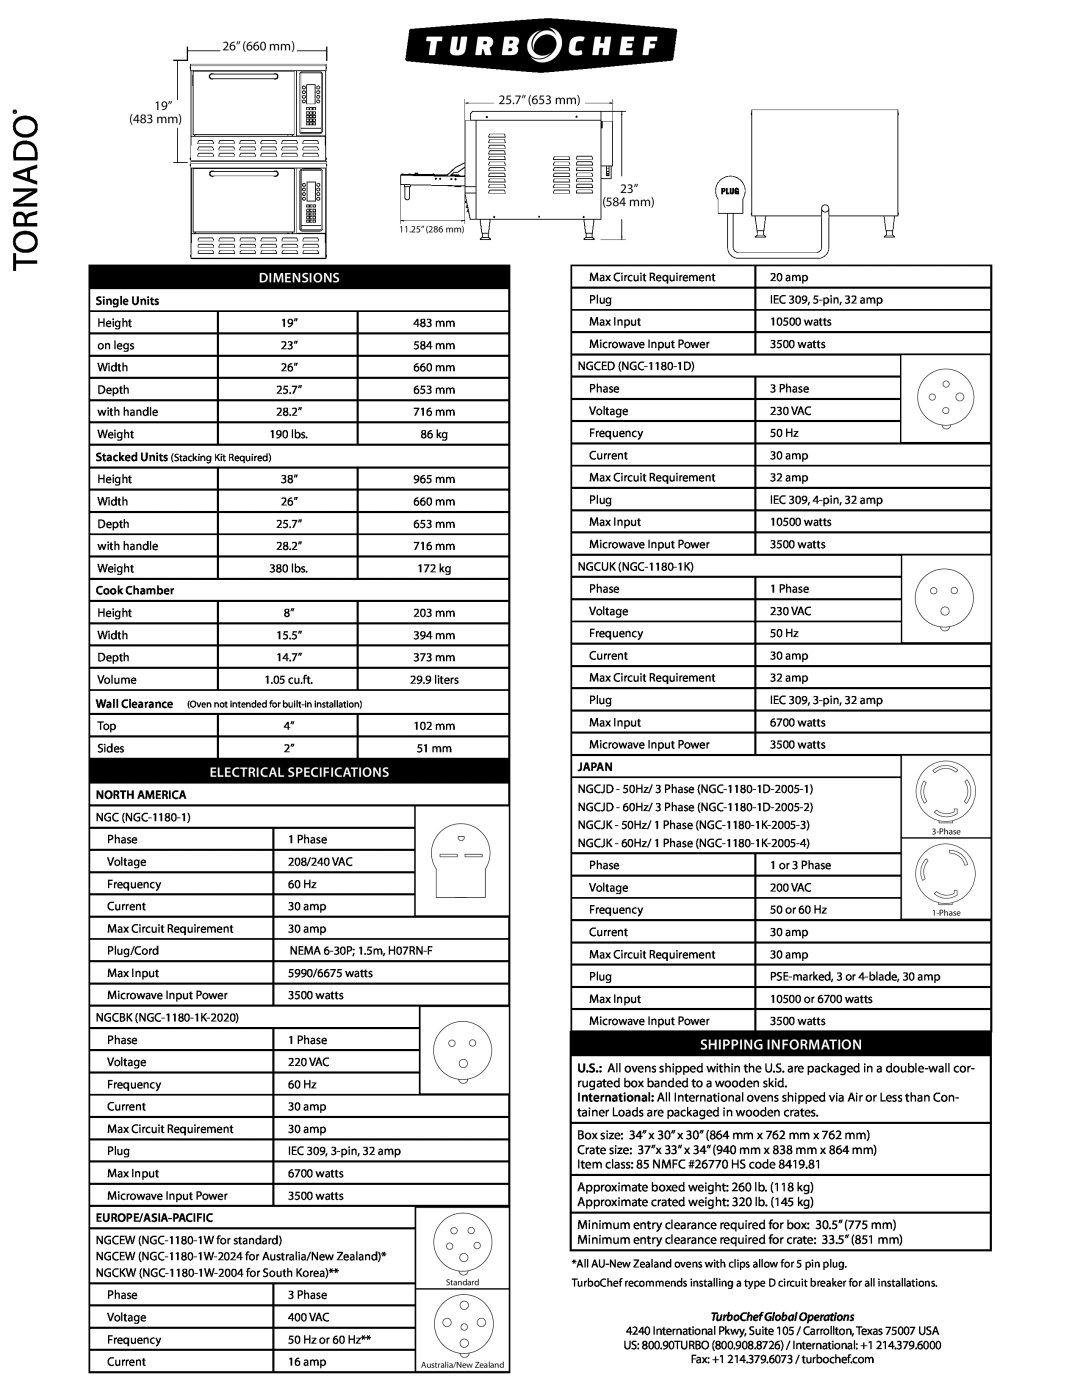 Turbo Chef Technologies Tornado 2 manual Shipping Information, Dimensions, Electrical Specifications 